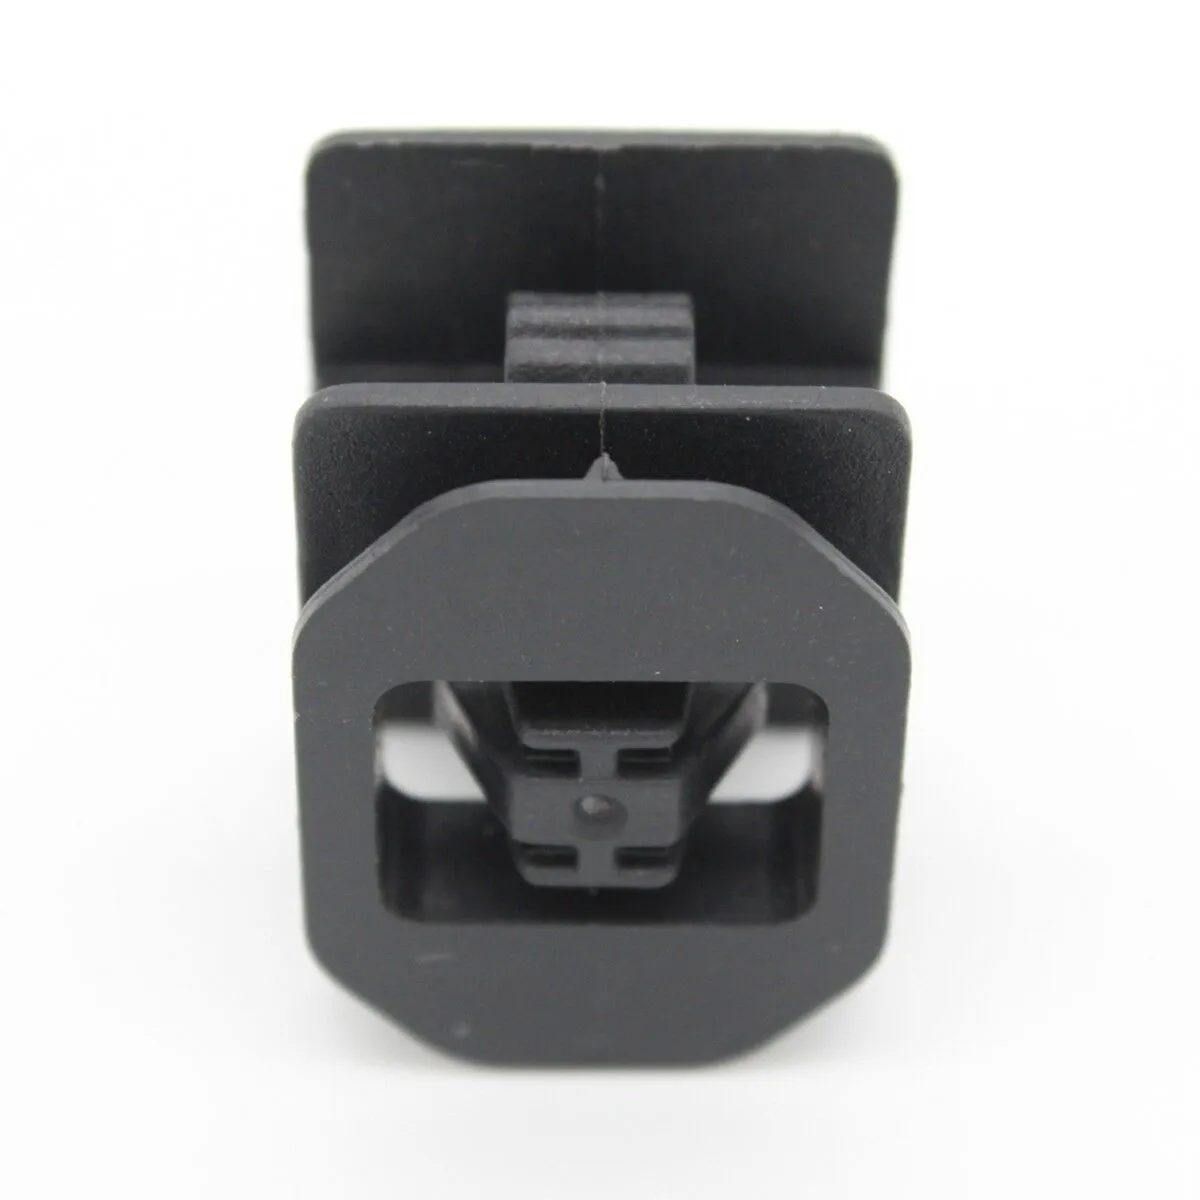 

10pcs Moulding Clips 6G1Z-5410182-A Black Fasteners For Ford 500 2005+ Nylon Panel Replacement New Parts Accessory